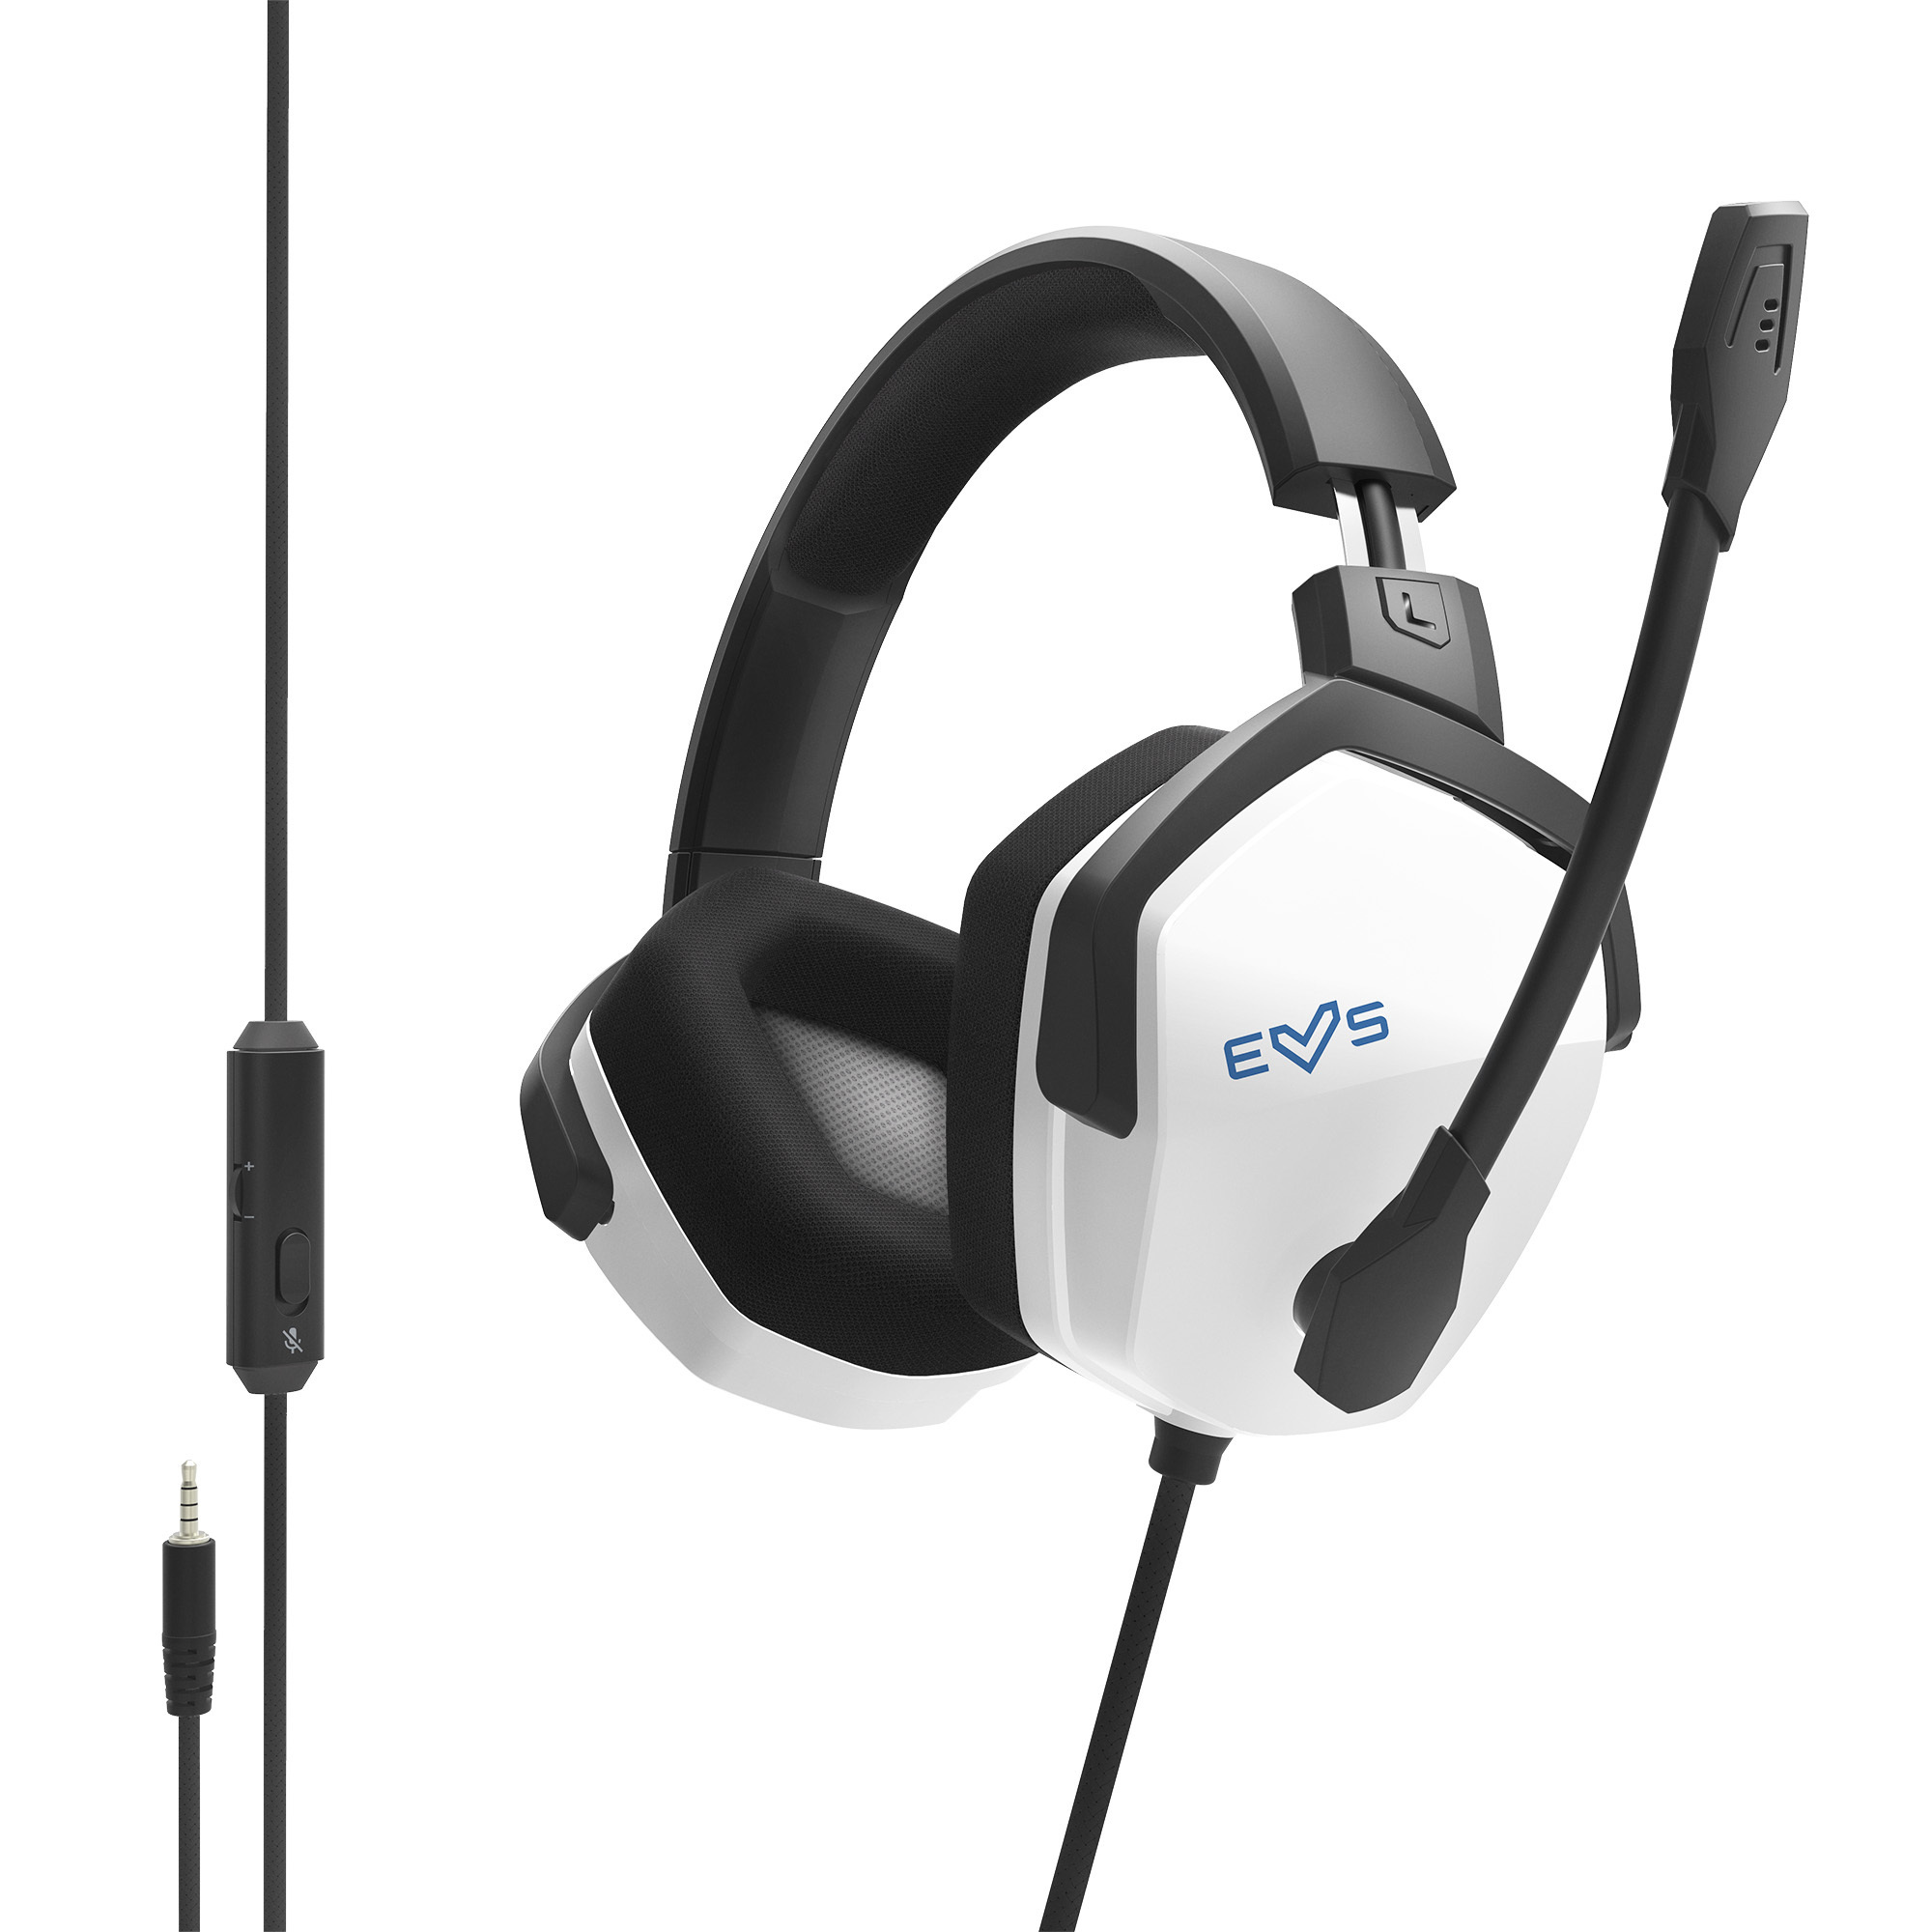 Headset powered with Deep Bass and Crystal Clear Sound